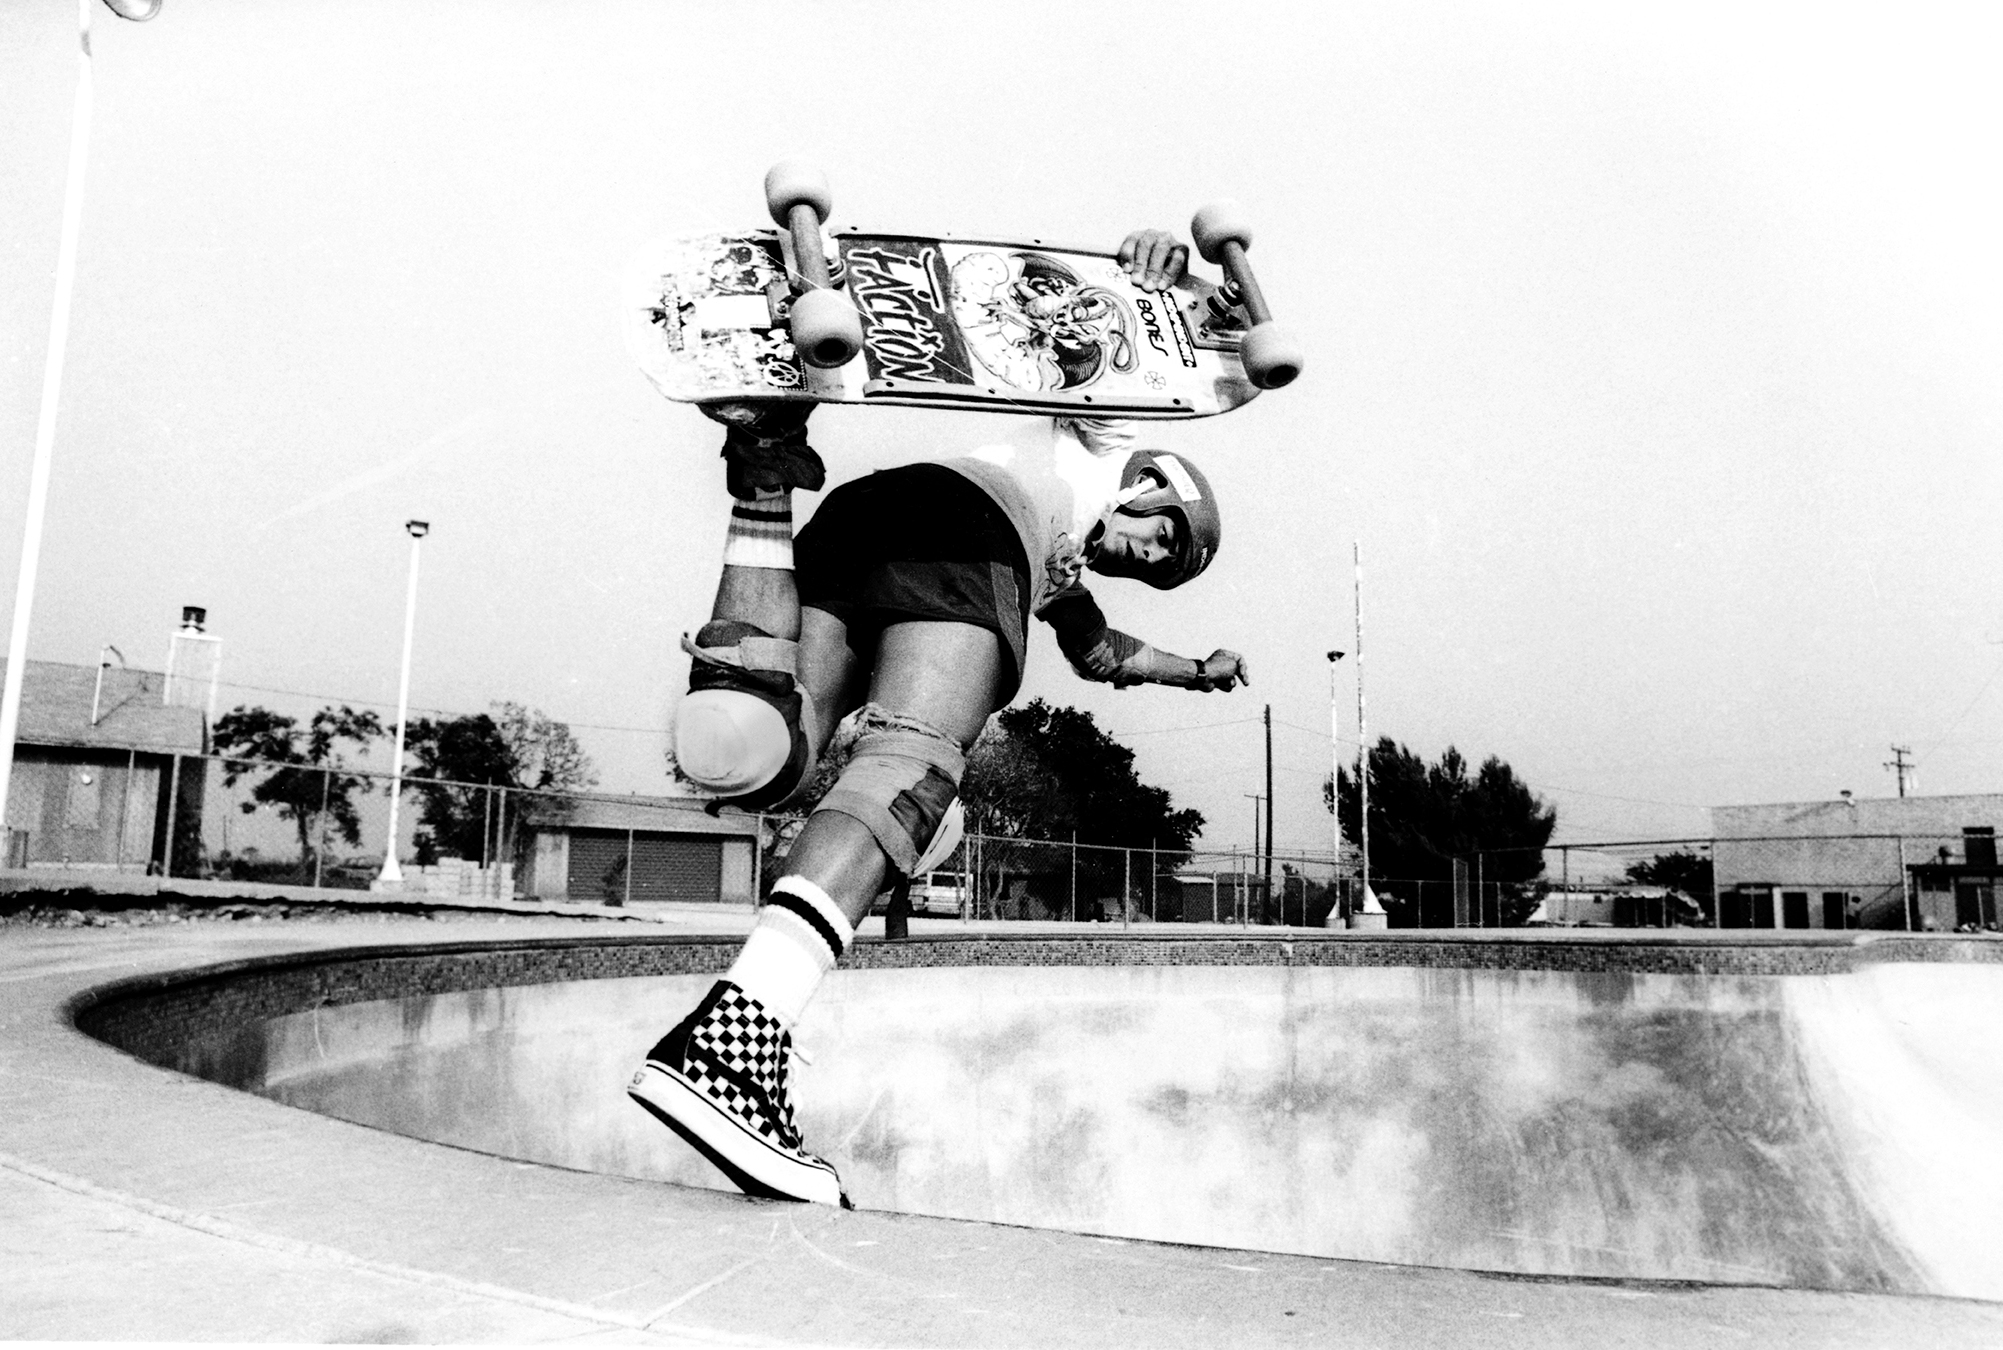 Professional skater Steve Caballero skates wearing a pair of Vans checkerboard high tops in 1984.